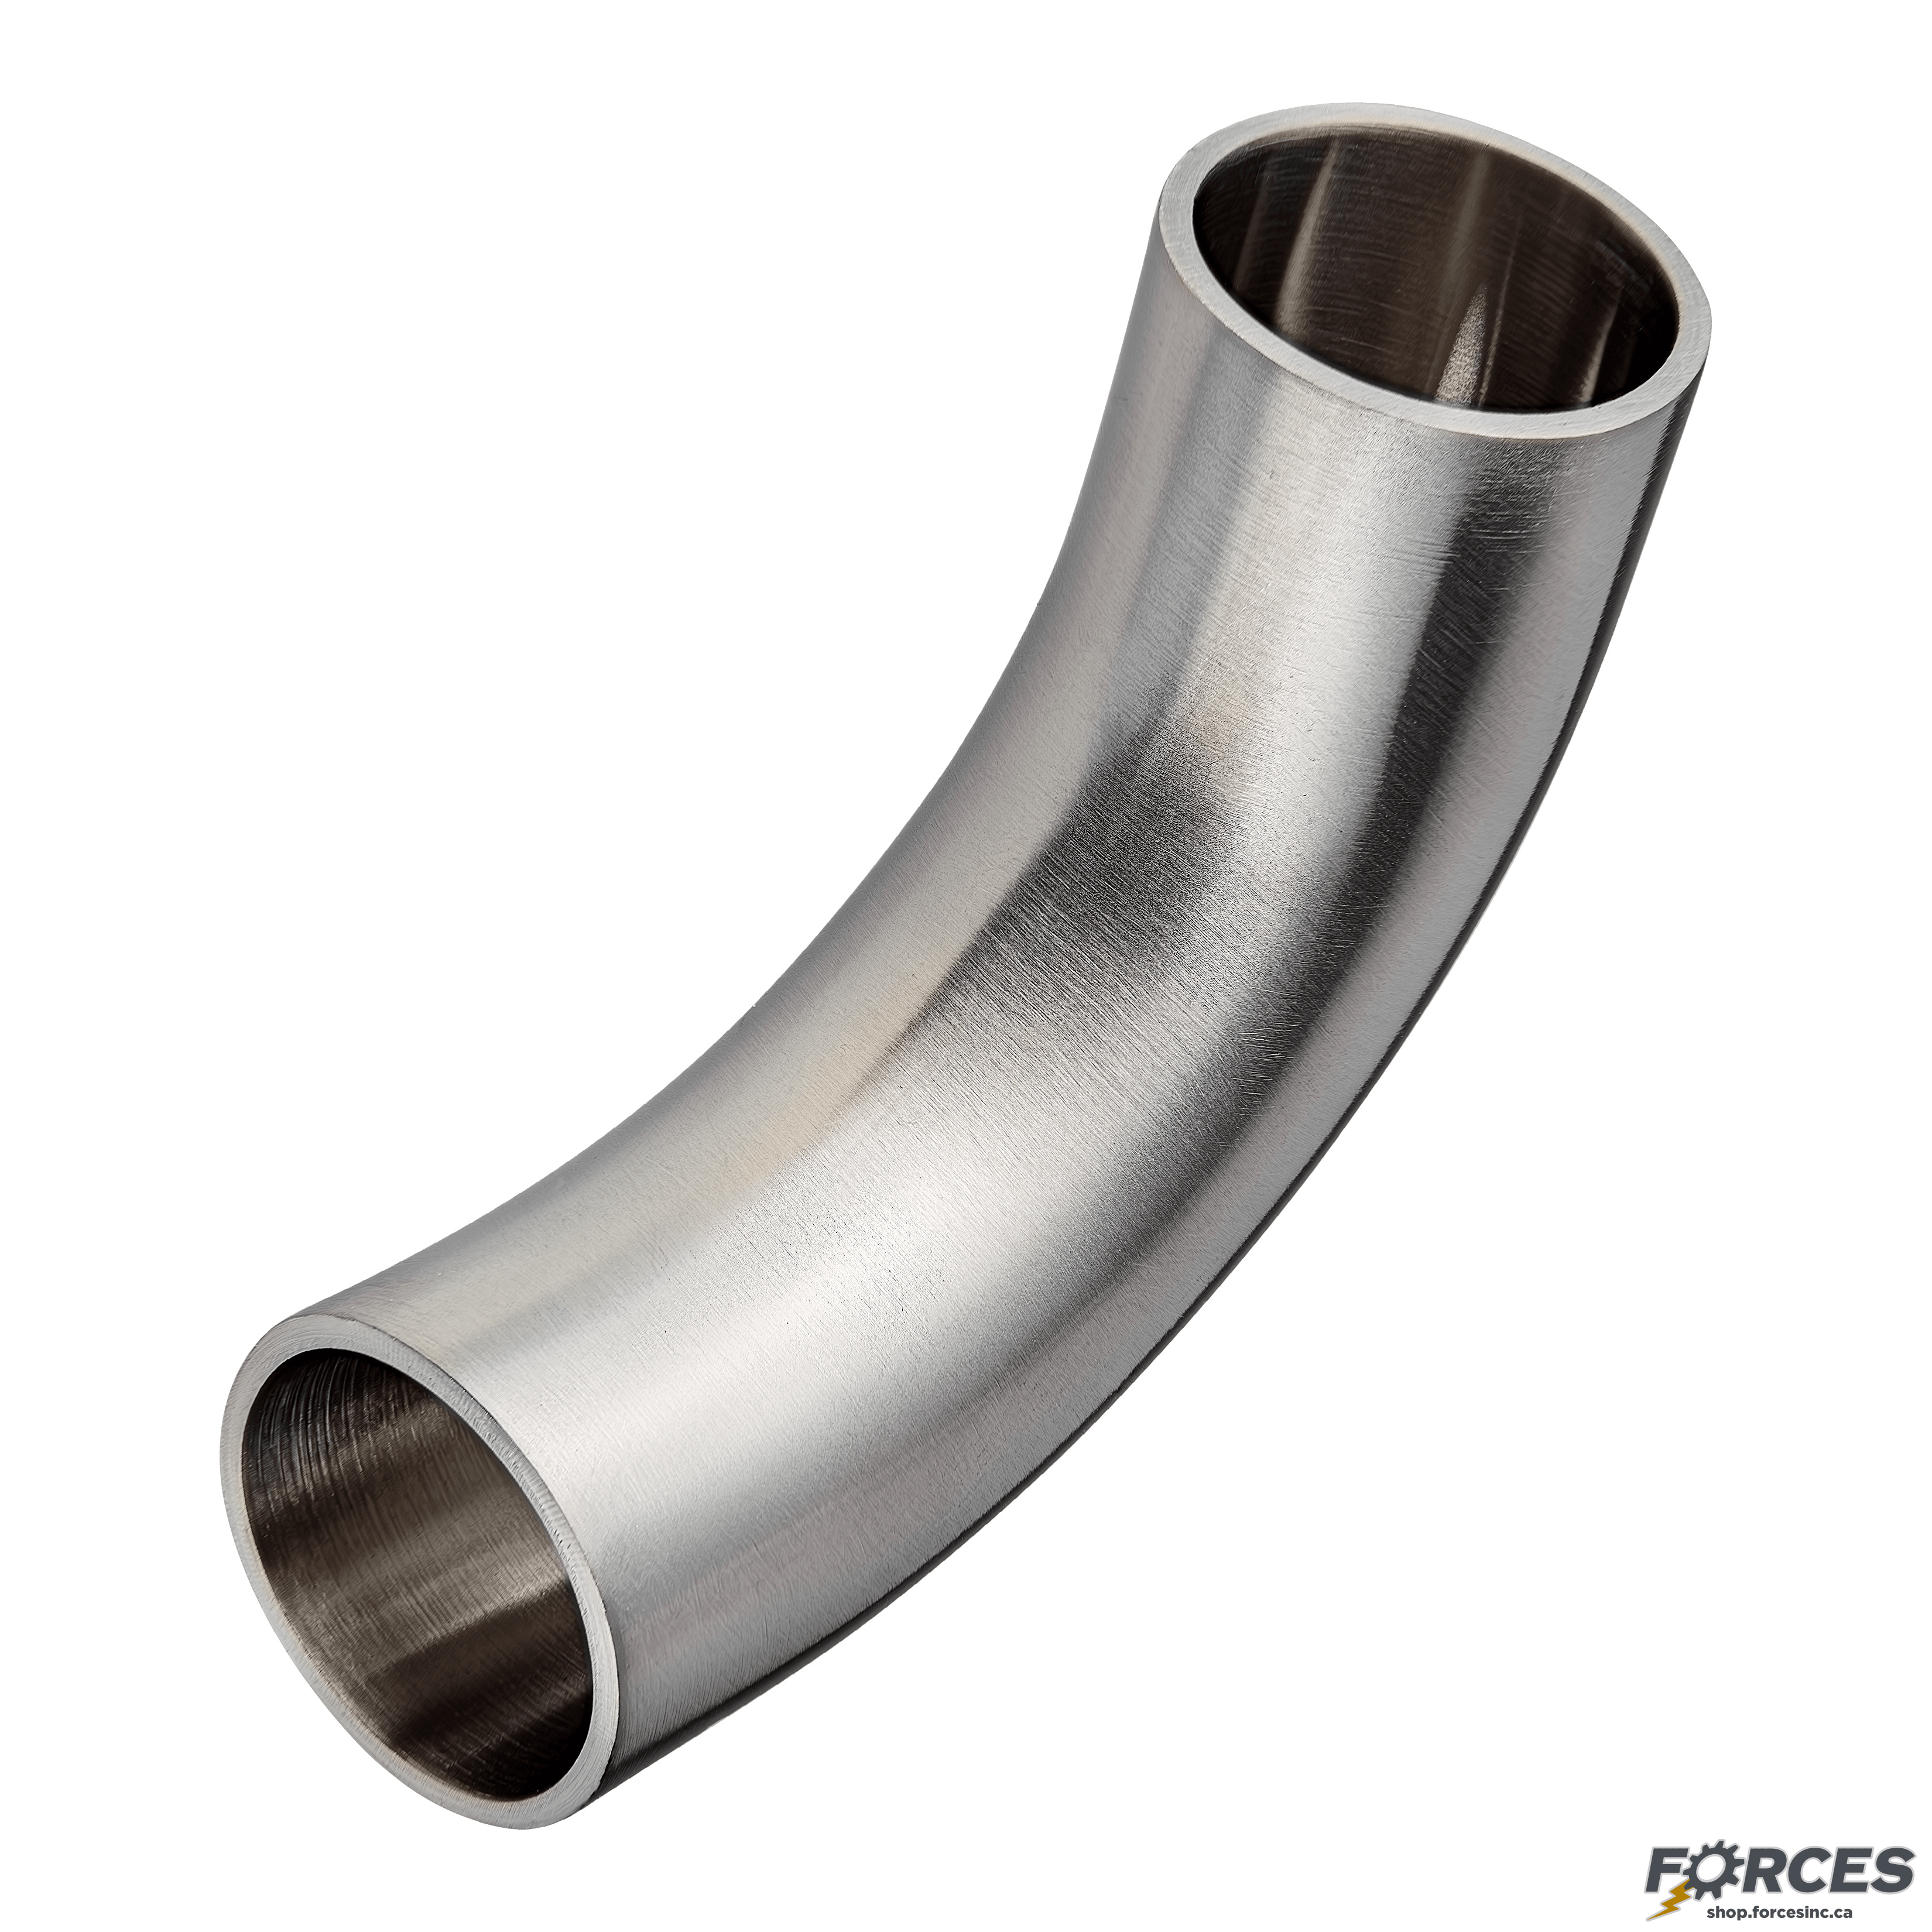 1-1/2" Butt Weld 90° Elbow Long Tangent - Stainless Steel 304 - Forces Inc